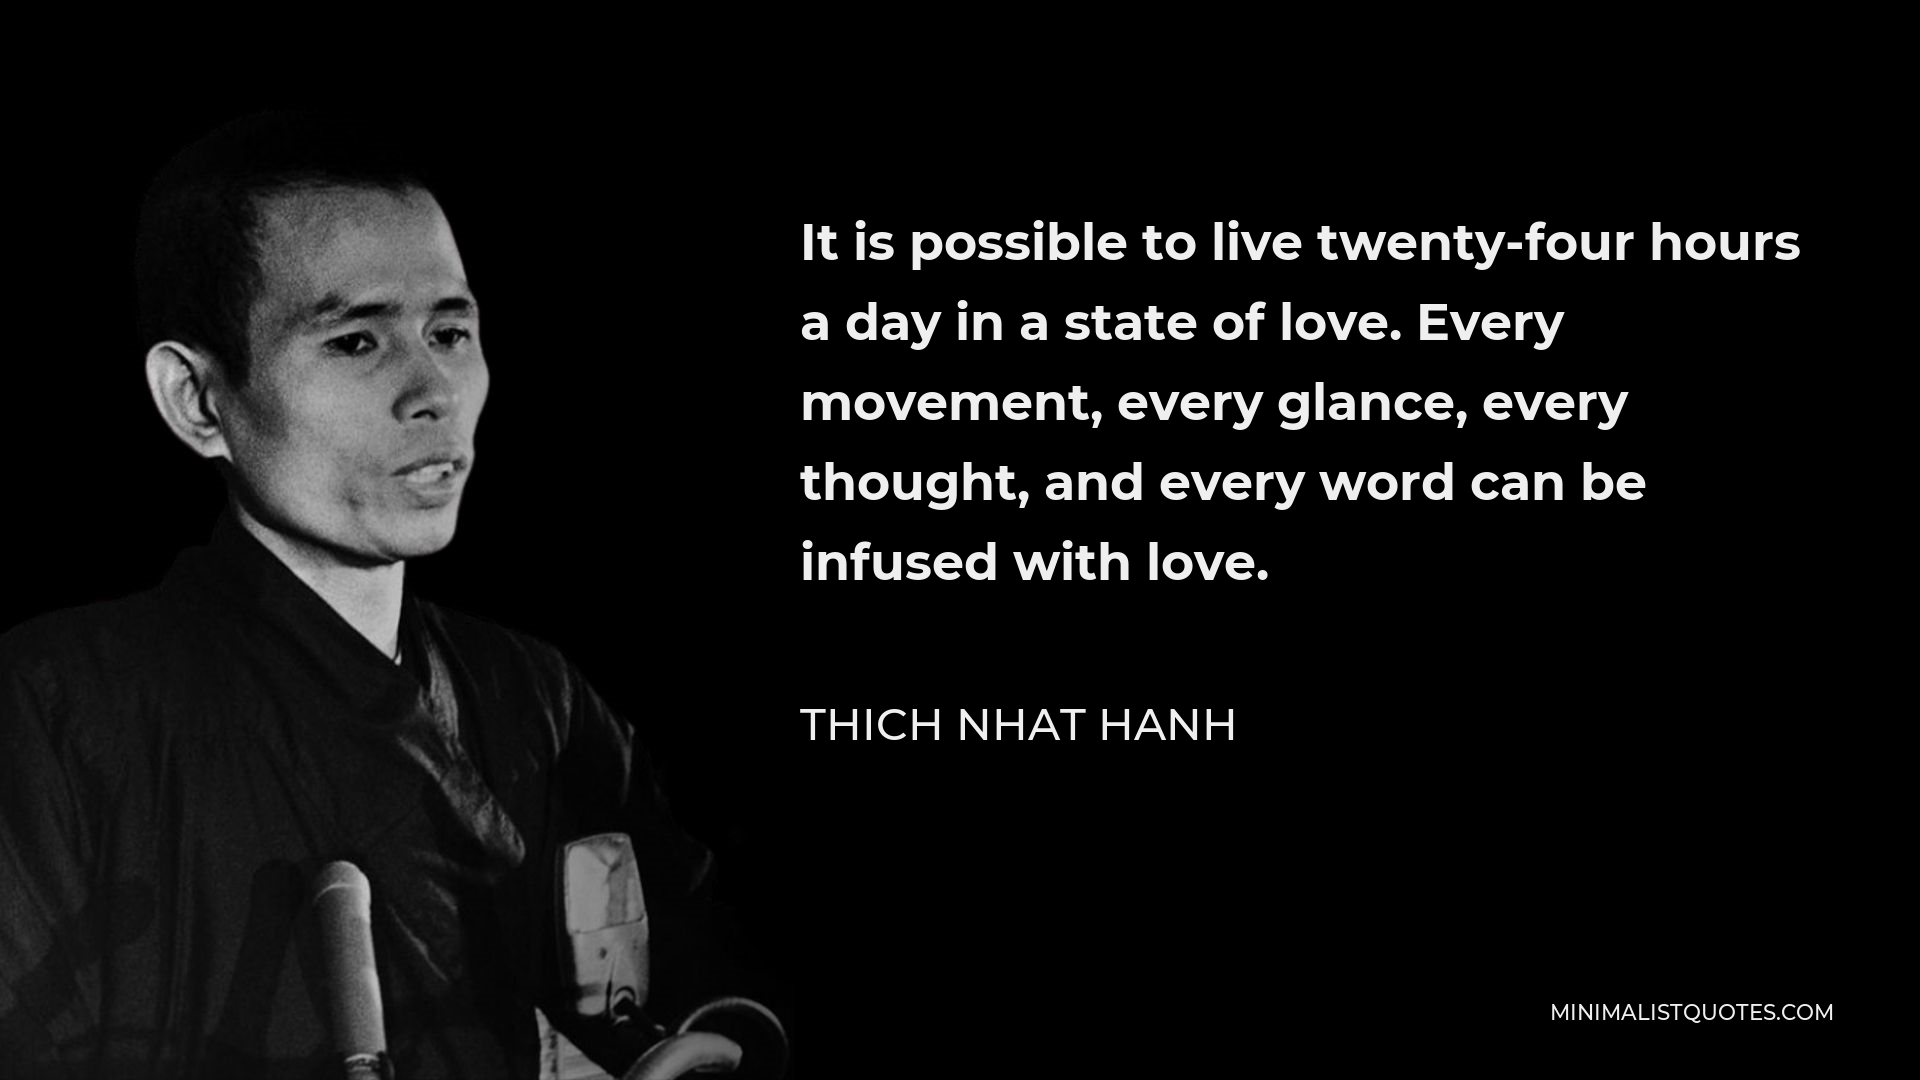 Thich Nhat Hanh Quote - It is possible to live twenty-four hours a day in a state of love. Every movement, every glance, every thought, and every word can be infused with love.